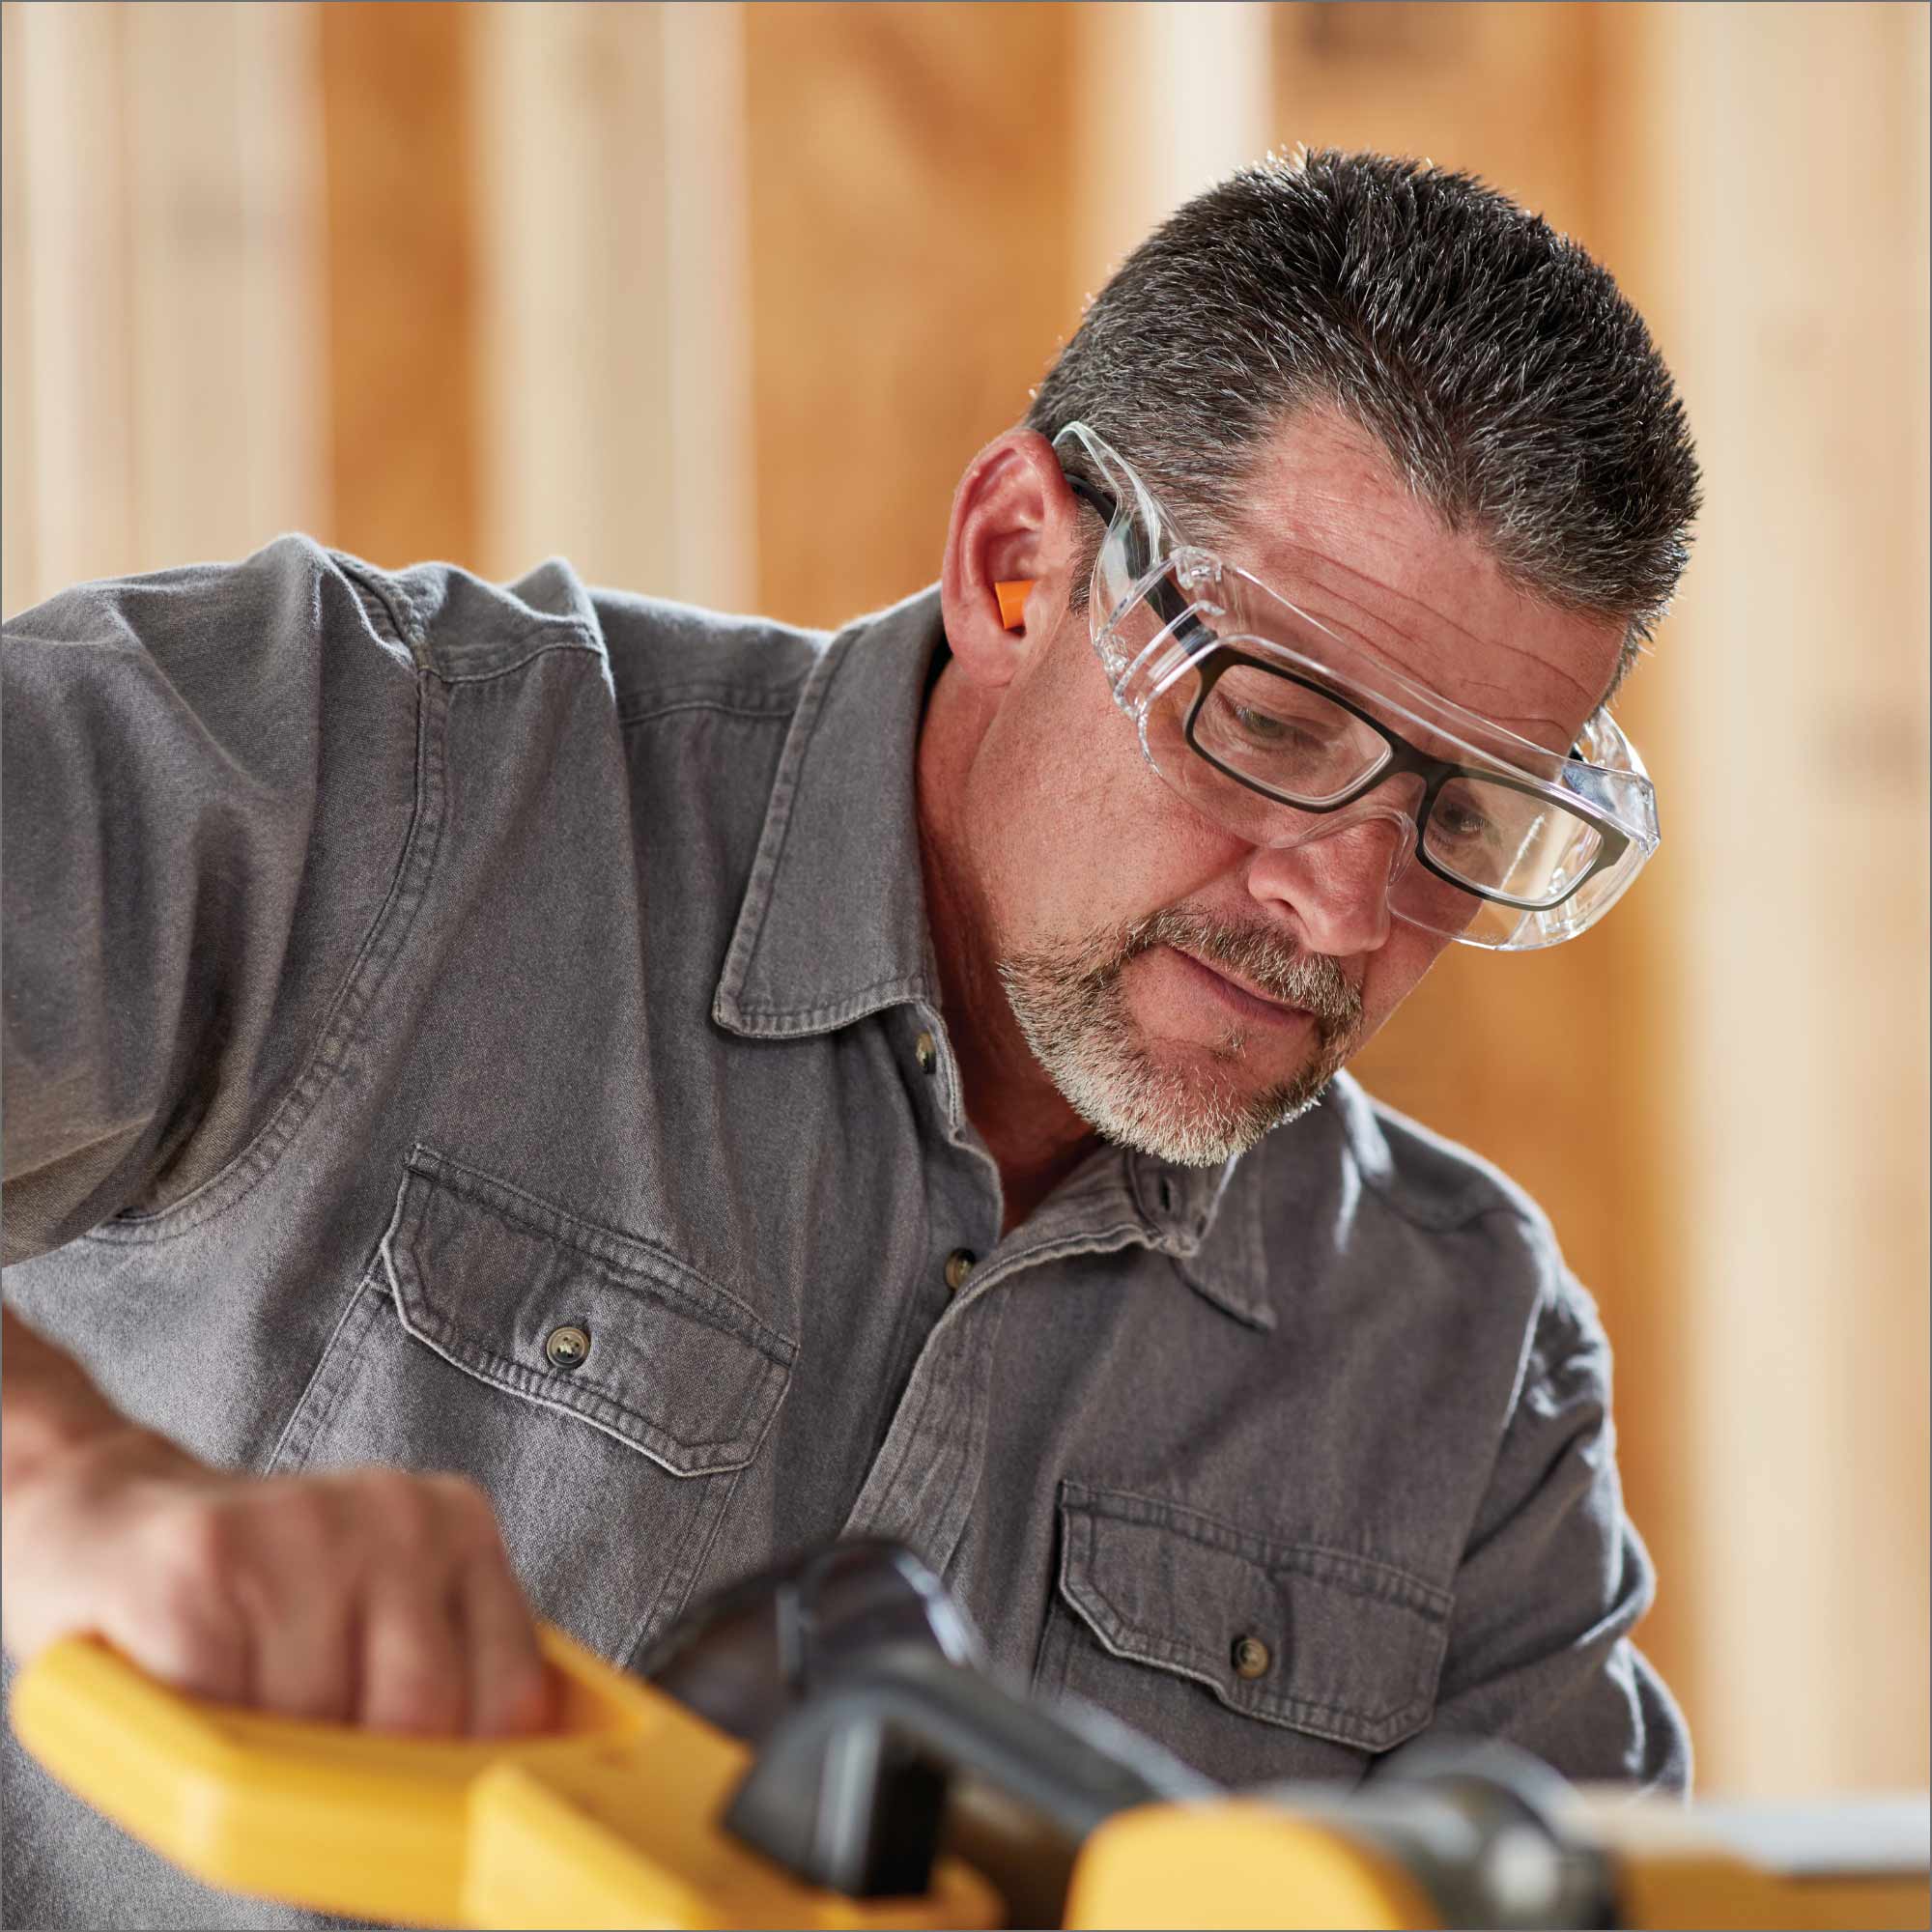 A worker wears safety goggles over his glasses.